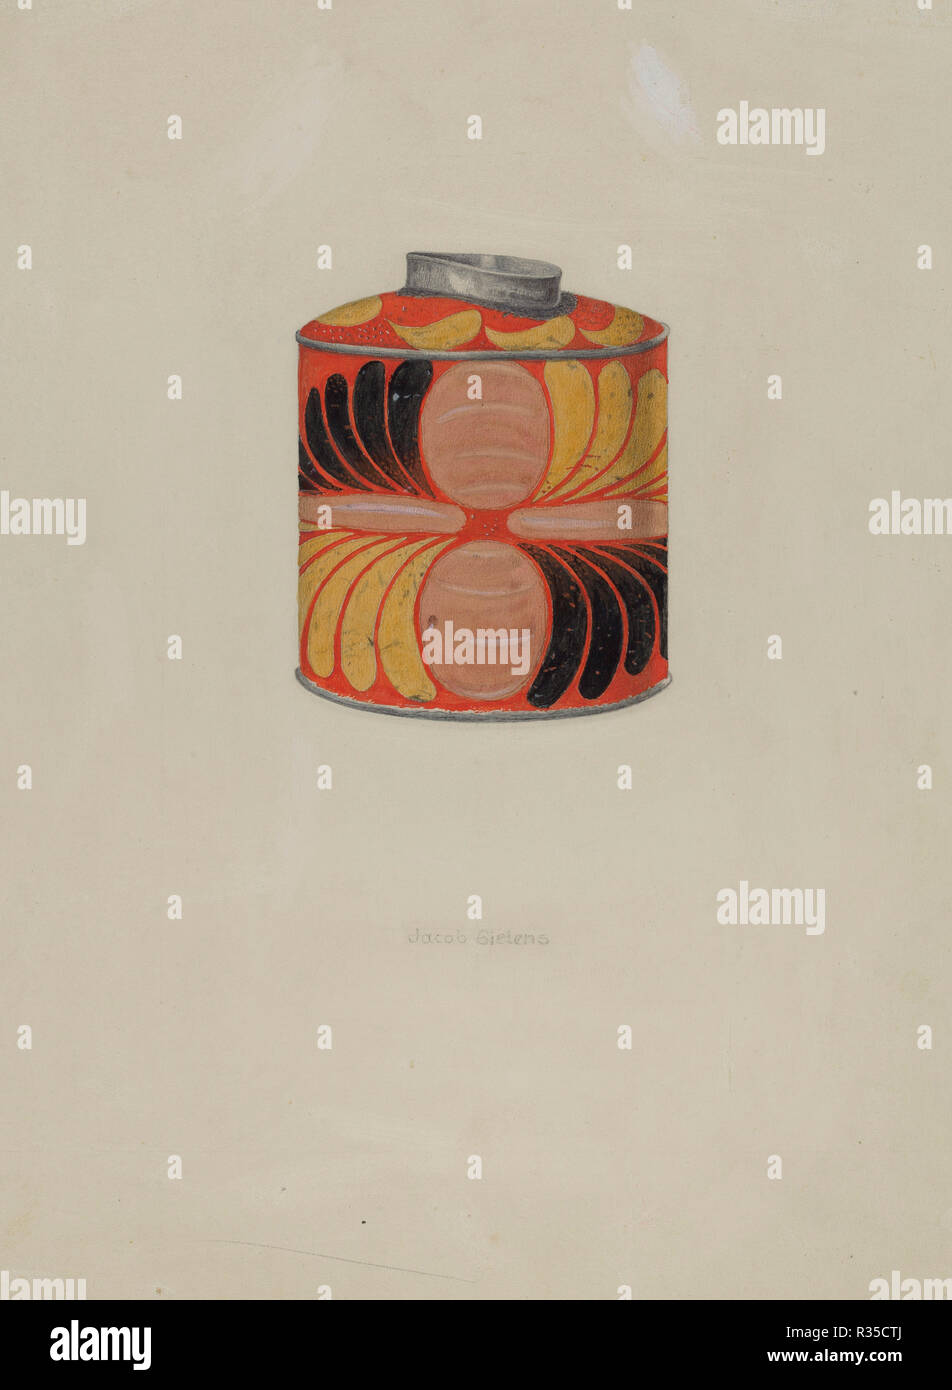 Toleware Tin Tea Caddy. Dated: c. 1937. Dimensions: overall: 32.9 x 24.5 cm (12 15/16 x 9 5/8 in.)  Original IAD Object: 3 1/2' wide: 4 1/2' high. Medium: watercolor, graphite, and gouache on paperboard. Museum: National Gallery of Art, Washington DC. Author: Jacob Gielens. Stock Photo